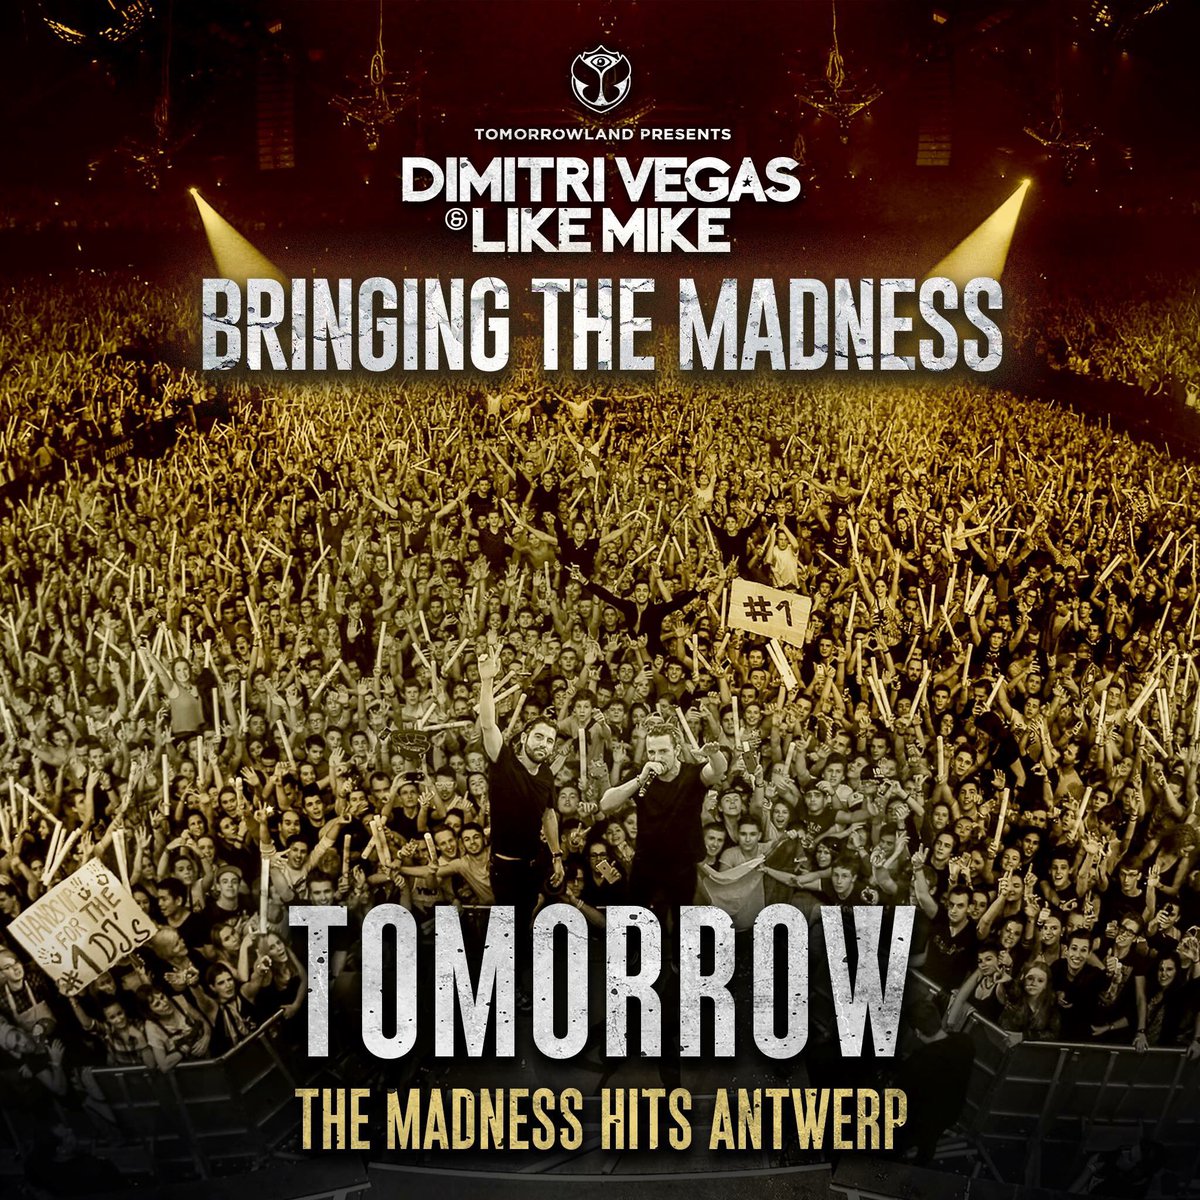 Tomorrow the Madness hits Antwerp again for our new #BringingTheMadness Concerts @likemike @tomorrowland 🔥 https://t.co/oxf5B0L0uZ